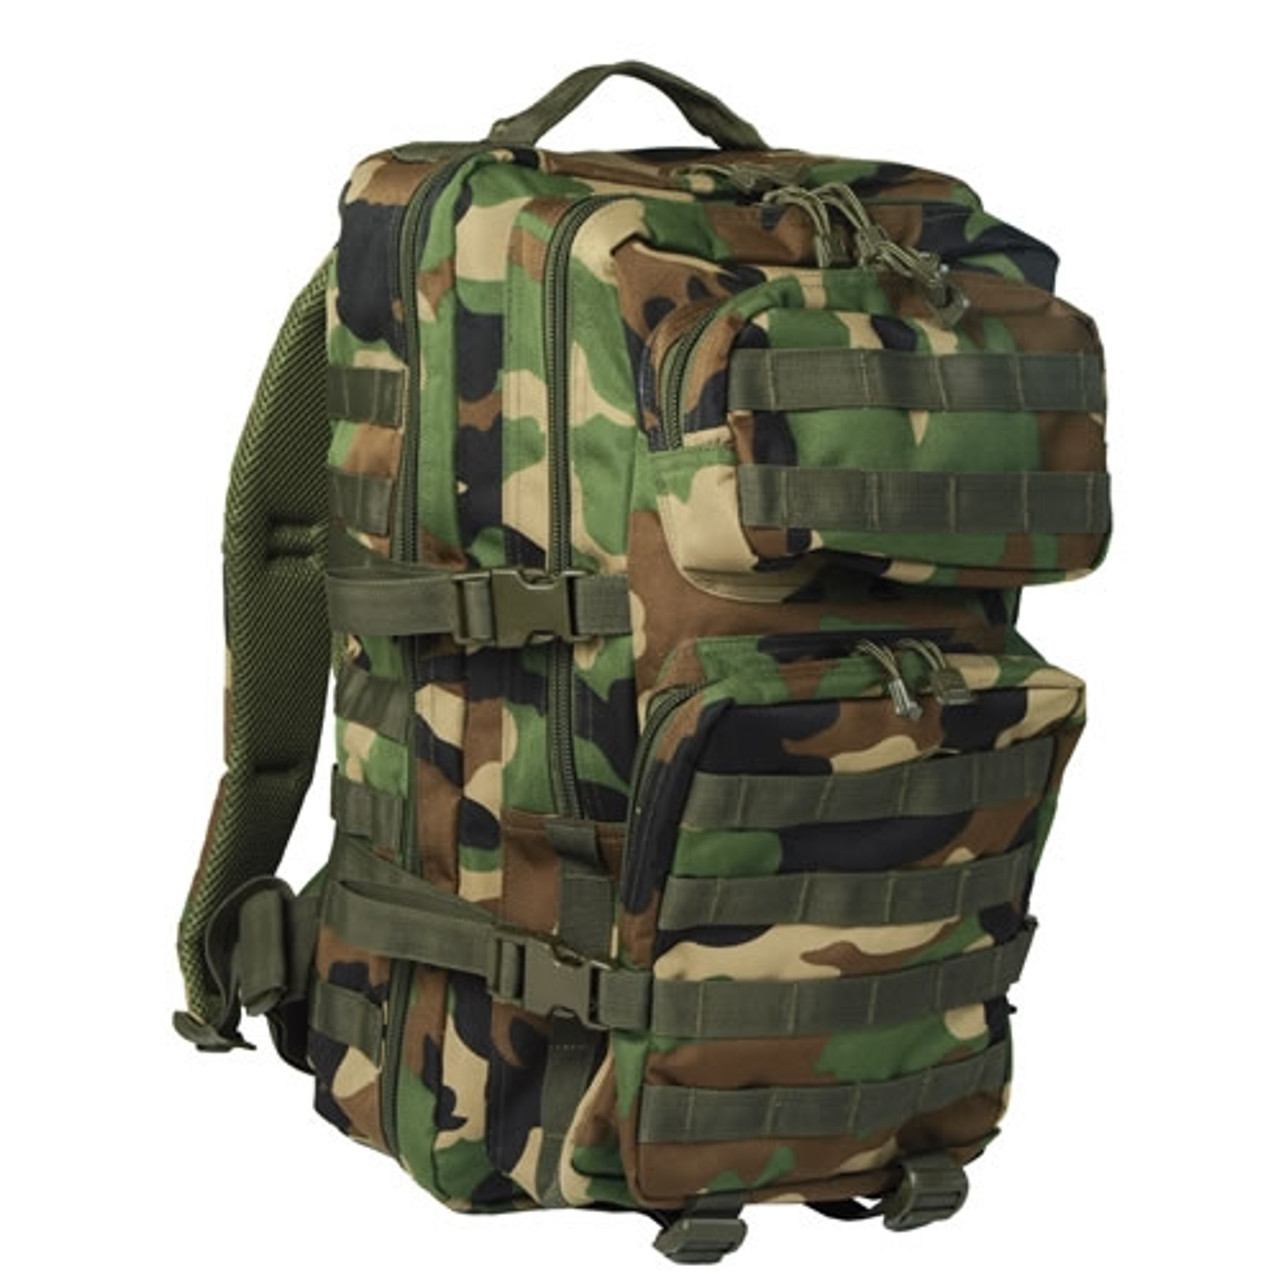 Woodland Camo Assault Pack - Large from Hessen Antique